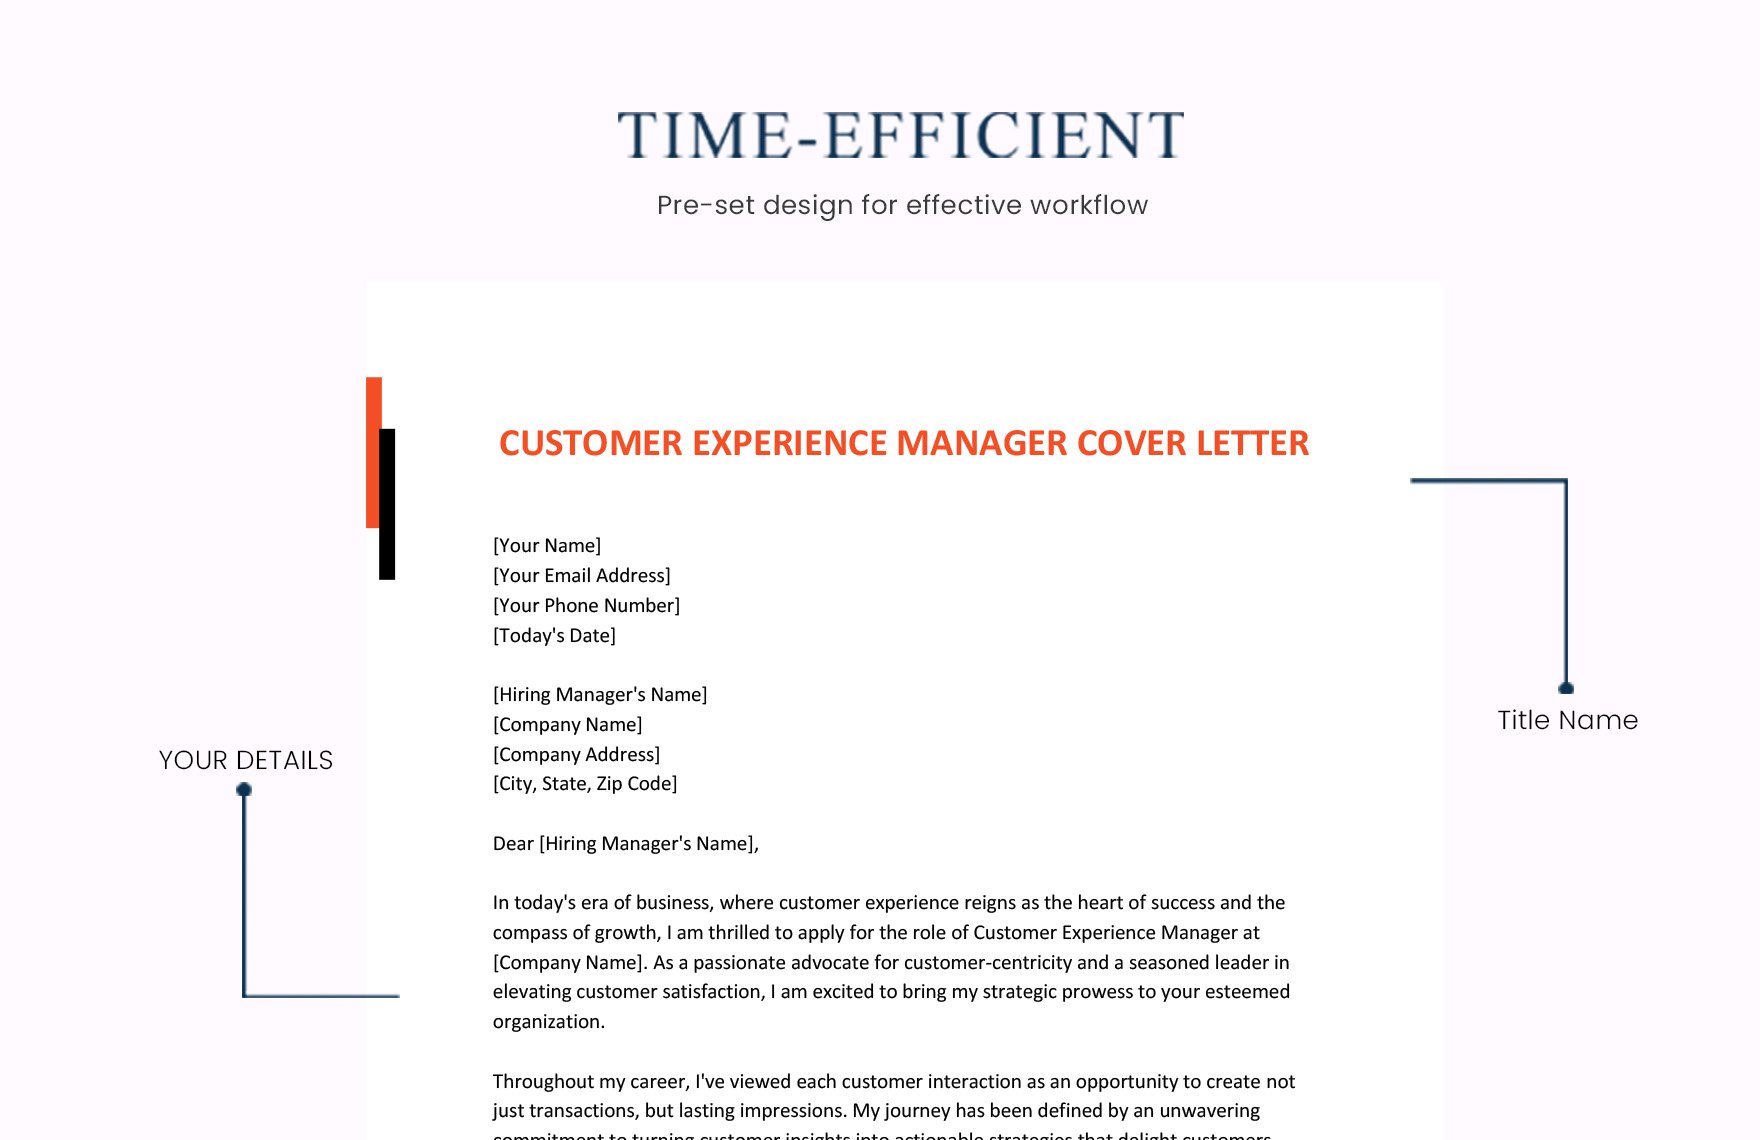 Customer Experience Manager Cover Letter